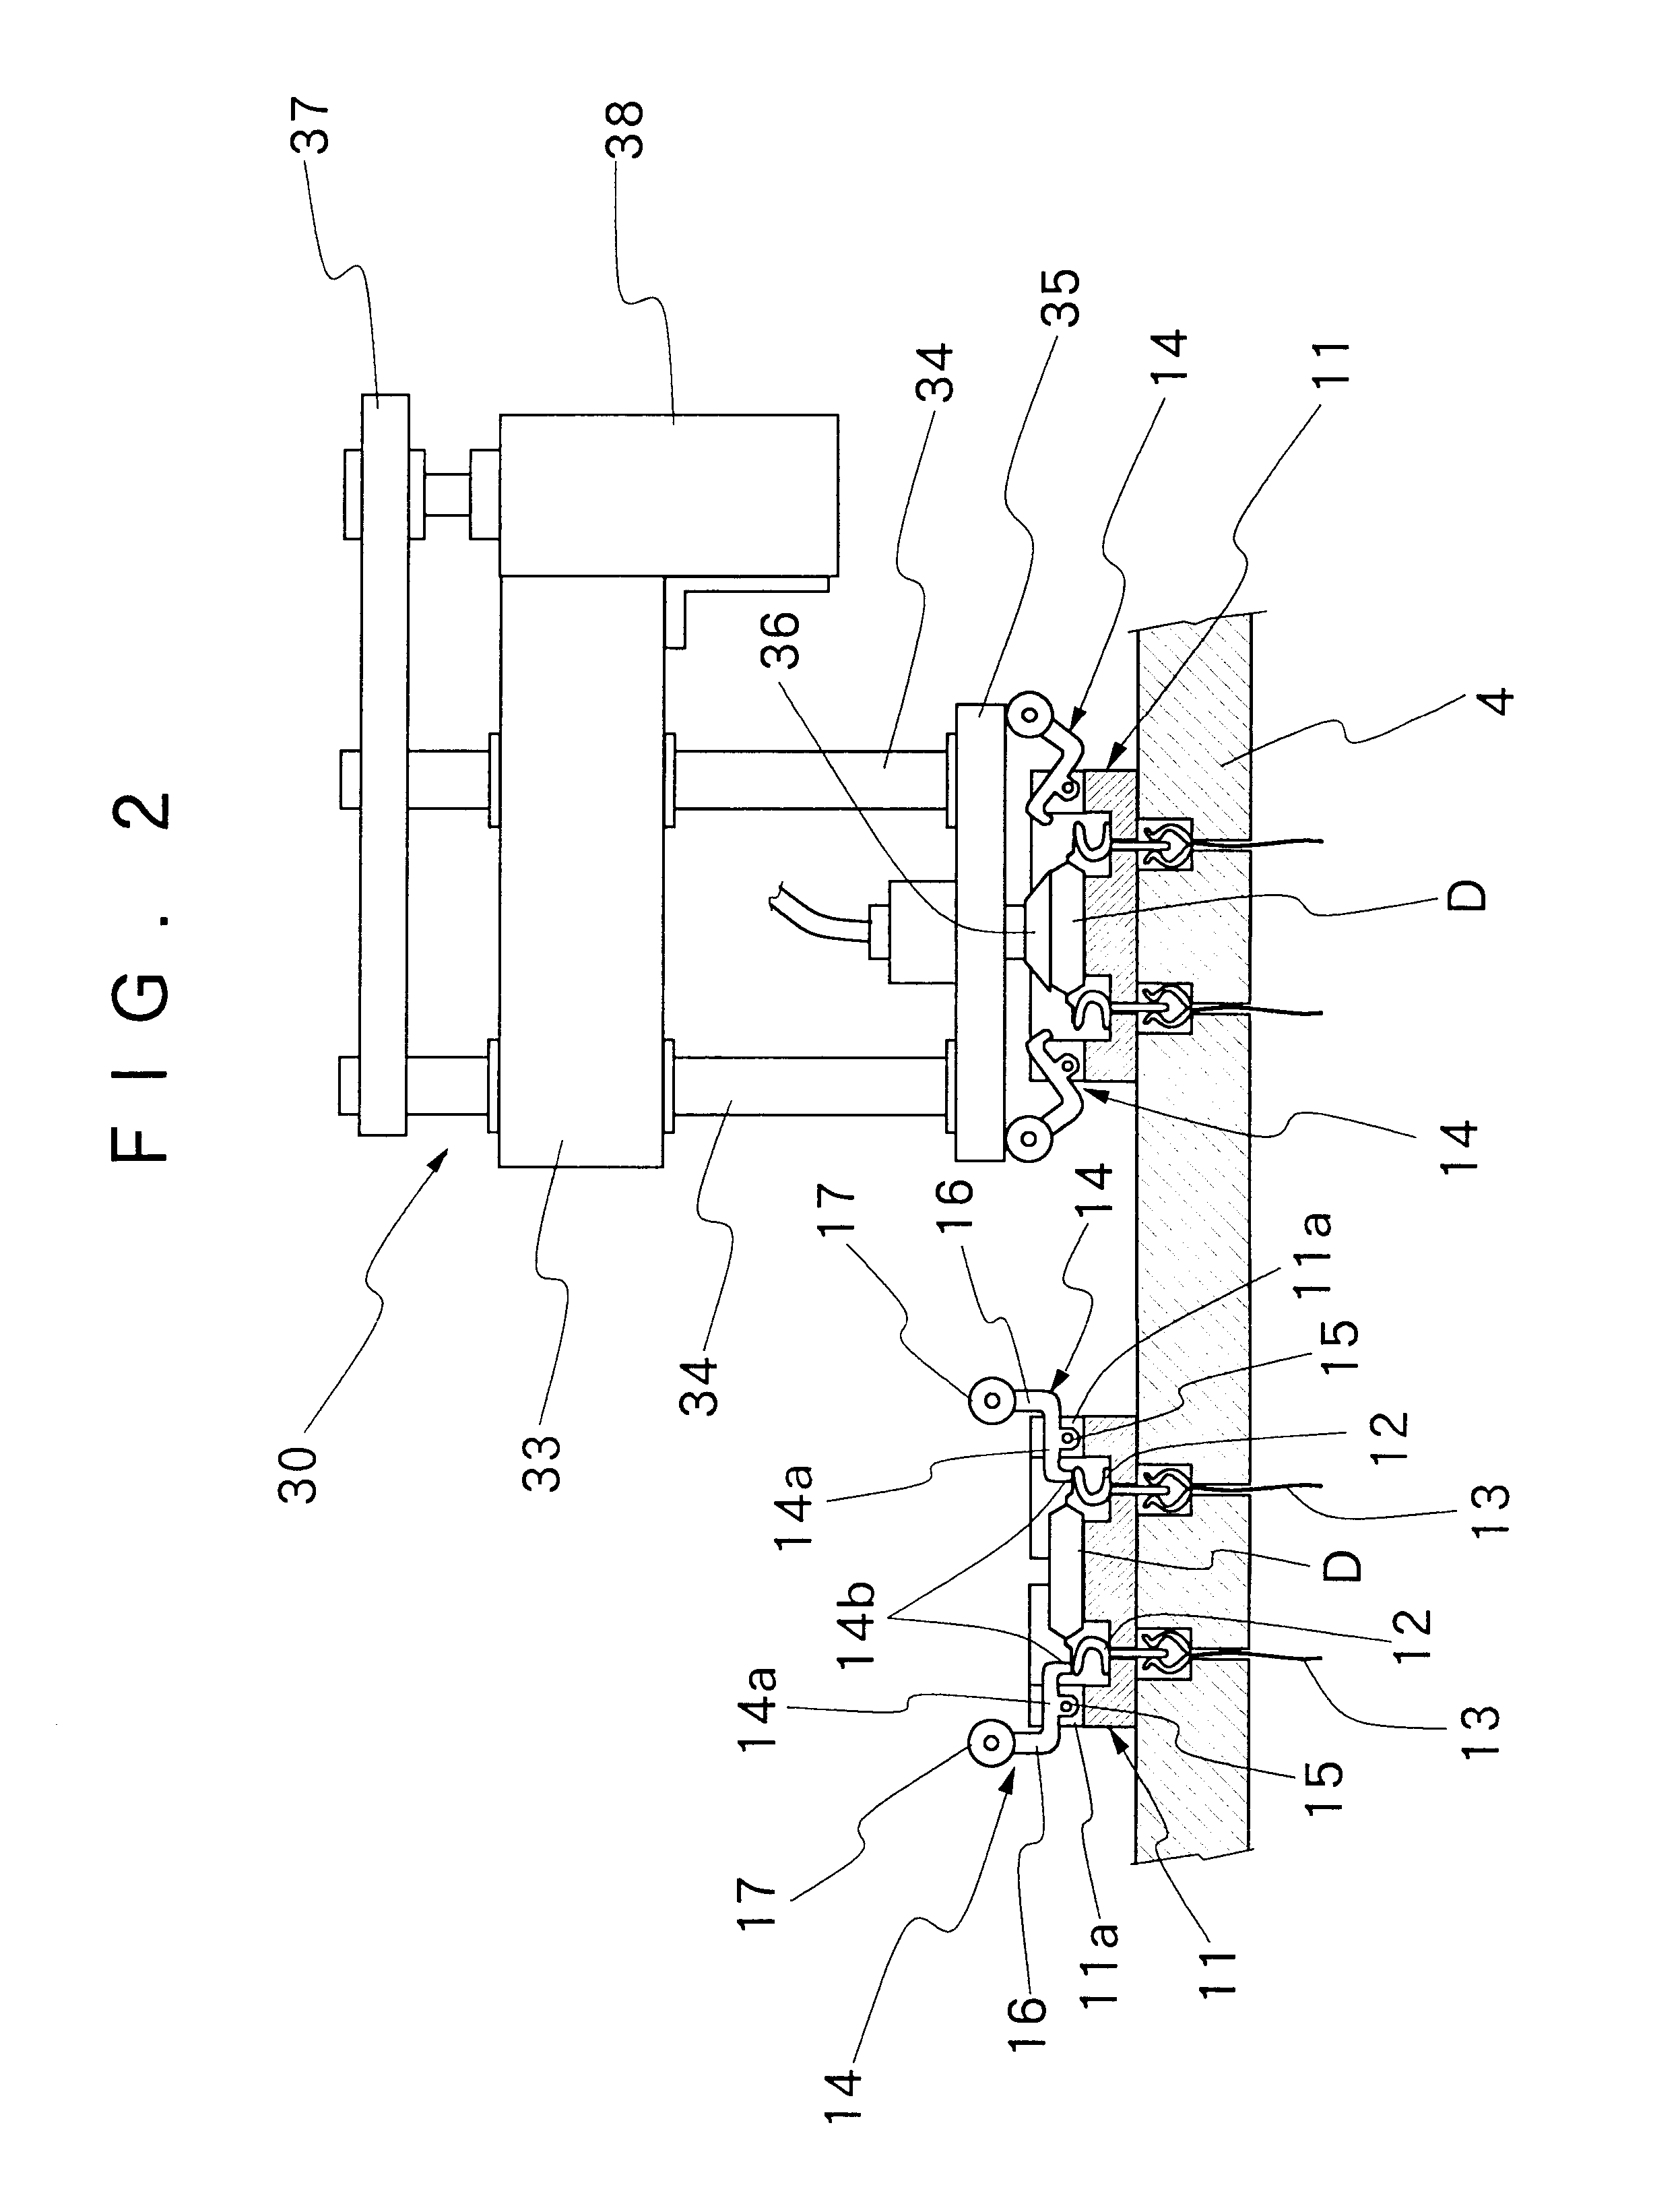 Method and apparatus for testing IC device